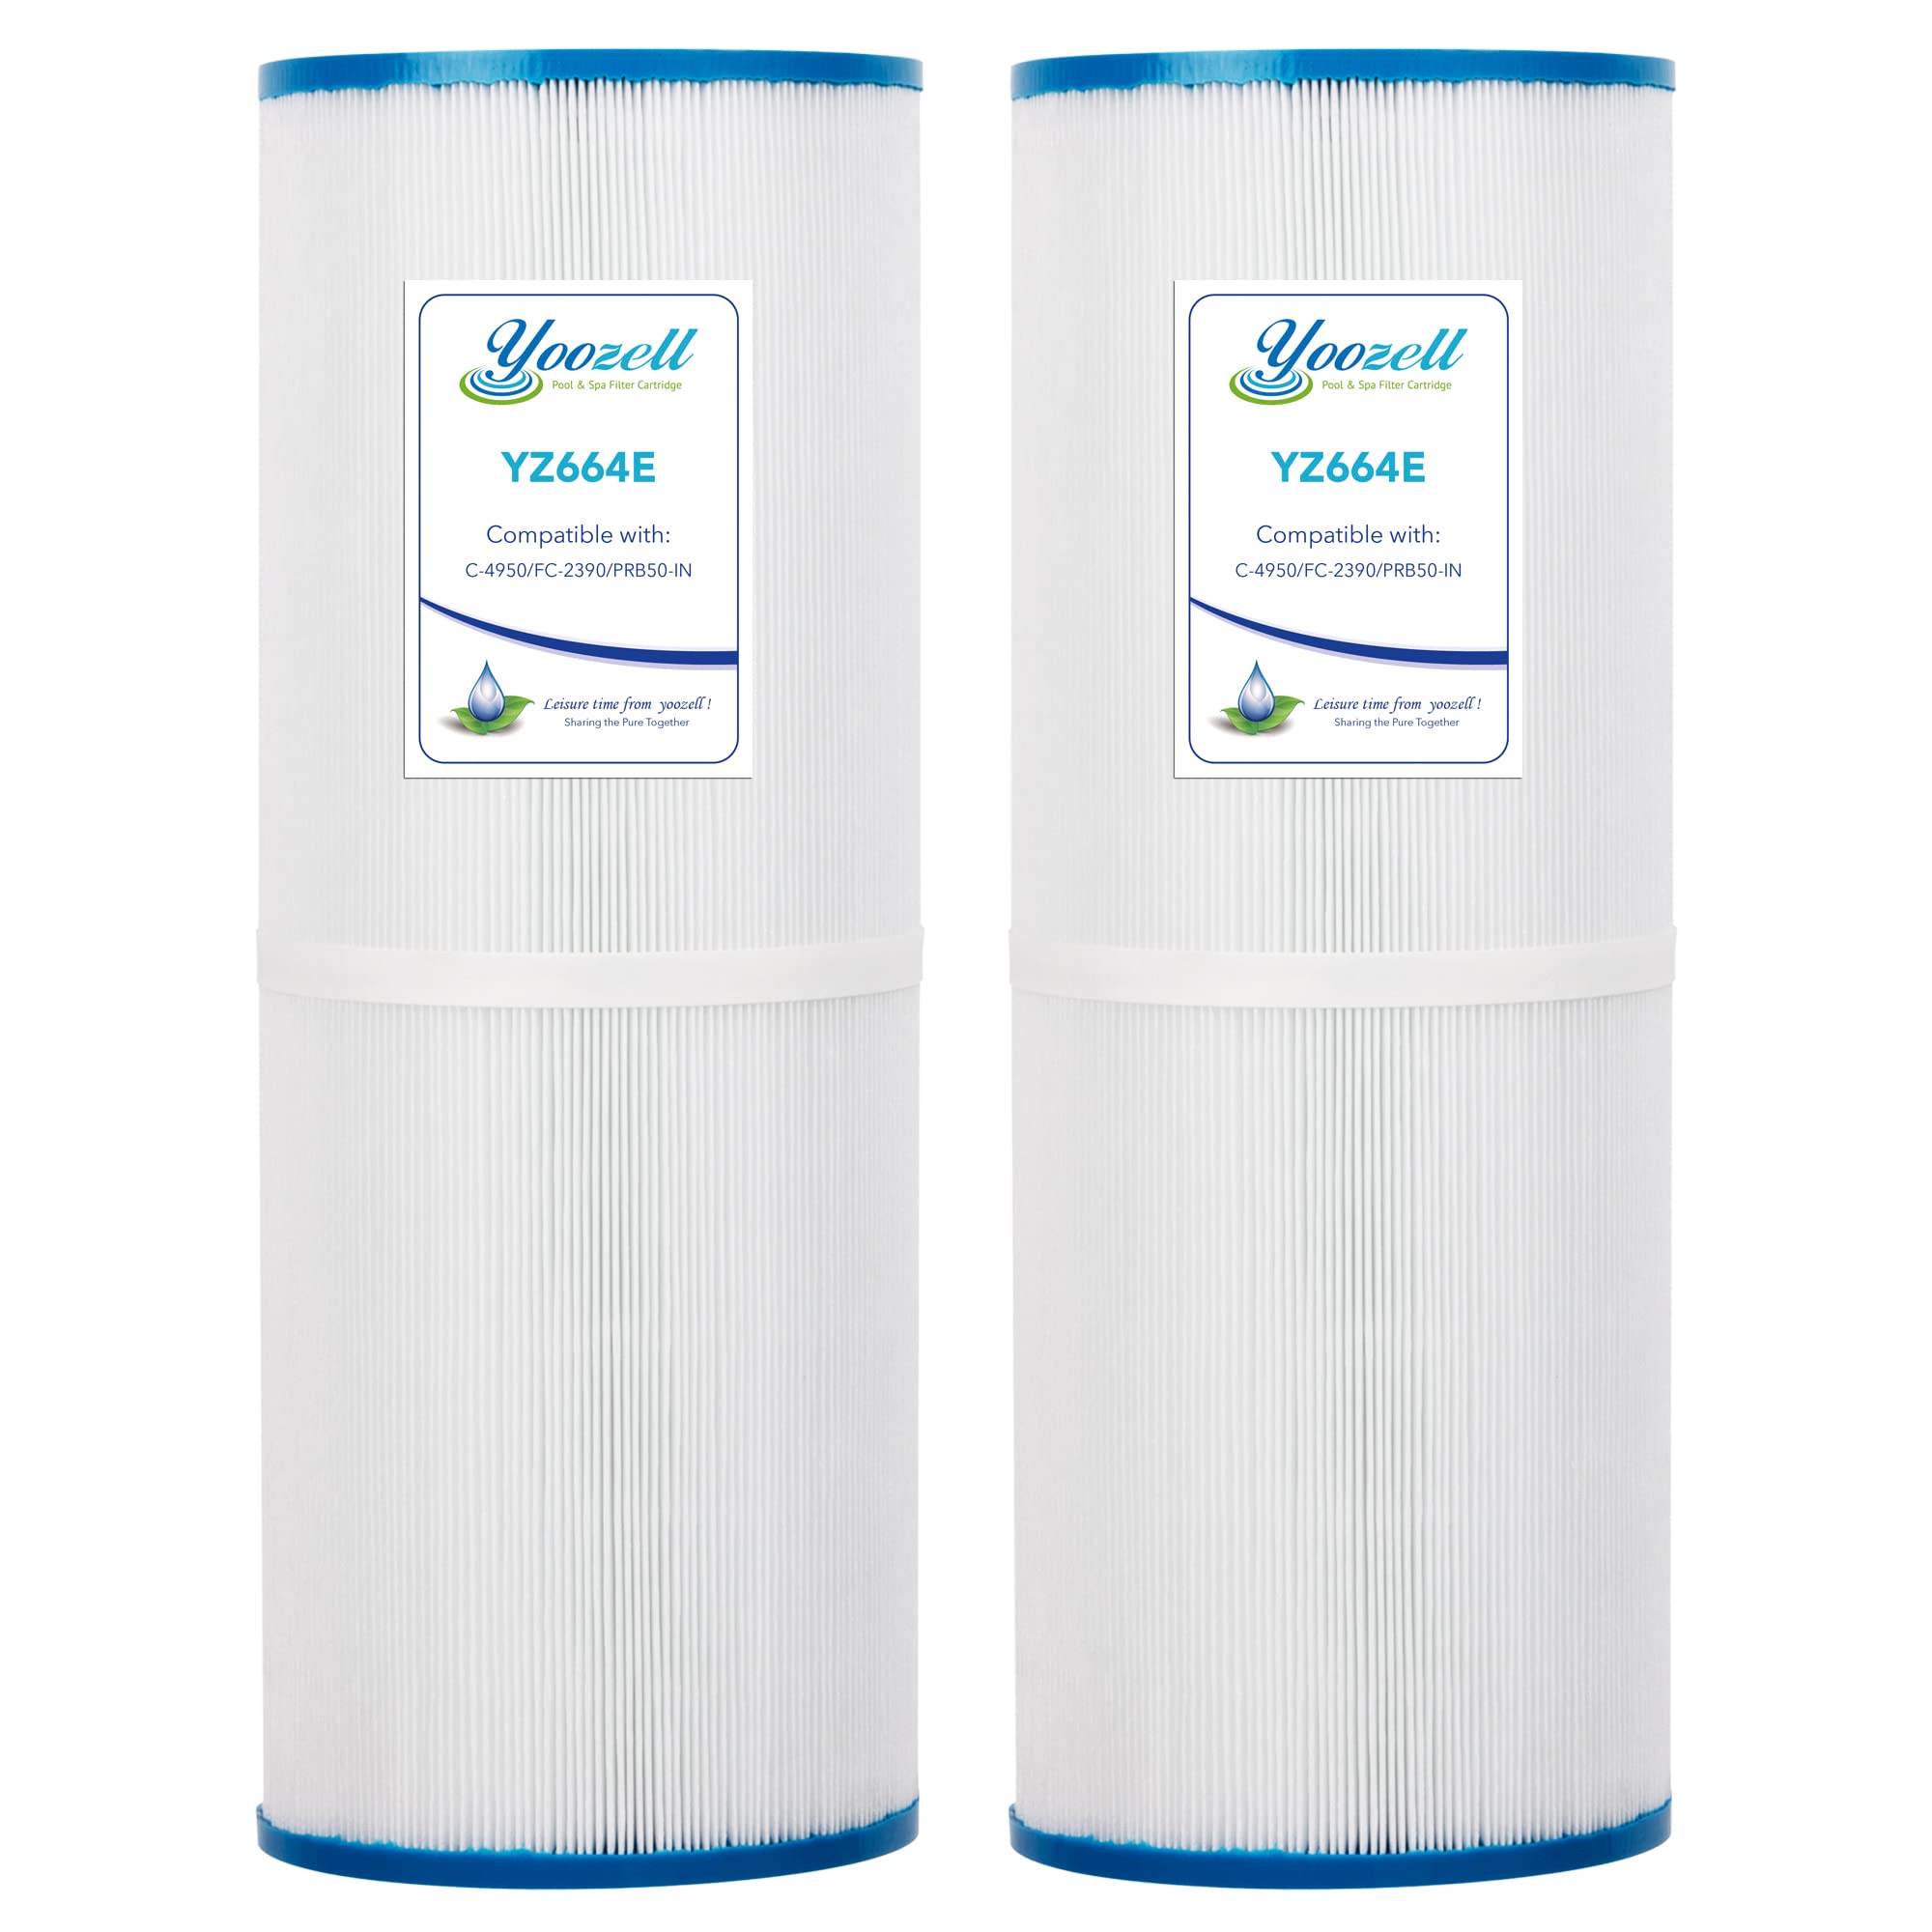 Yoozell PRB50-In Spa Filter Cartridge Compatible with Unicel C-4950 50Sq.ft Guardian 413-212-02 Filbur Fc-2390 03Fil1600 17-2380 Darlly 40506 2 Pack…